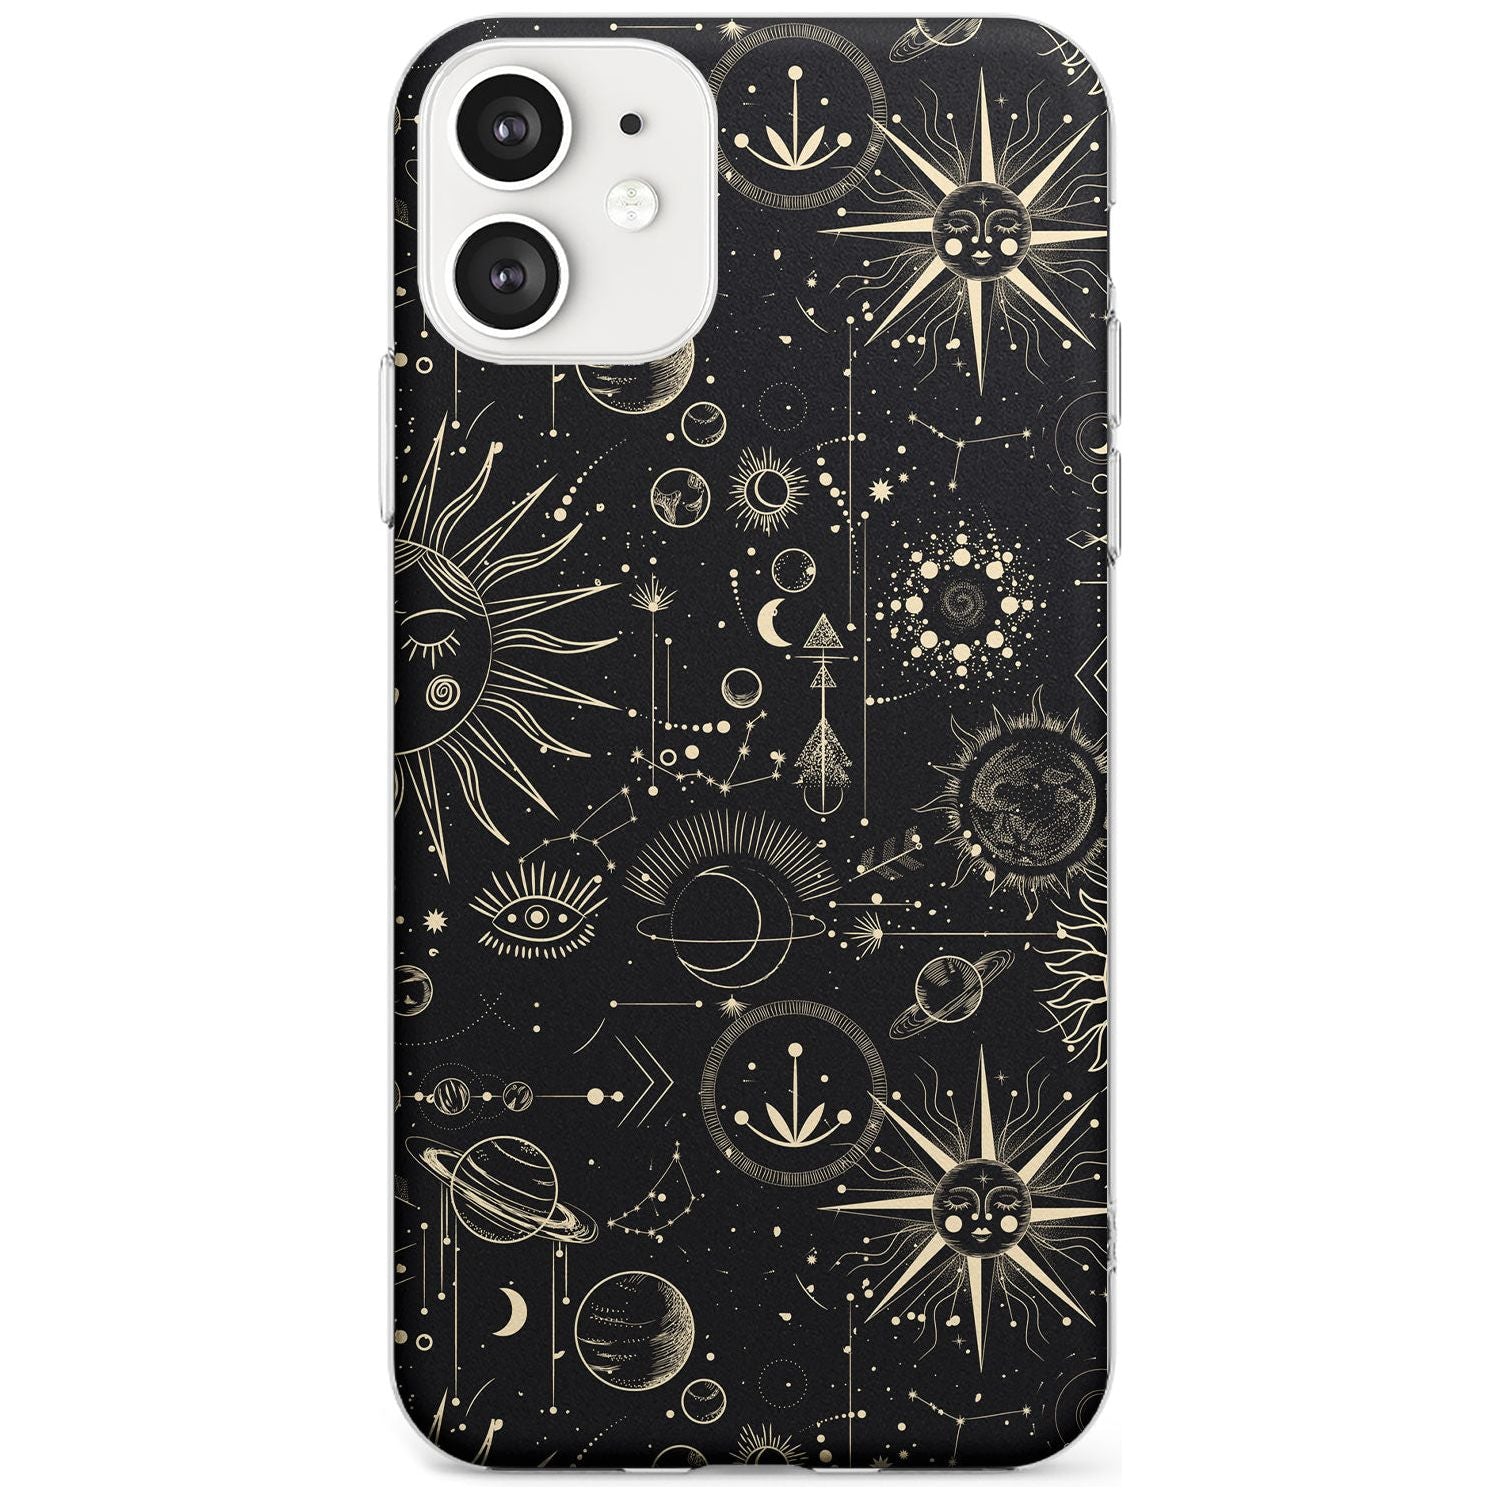 Suns & Planets Black Impact Phone Case for iPhone 11